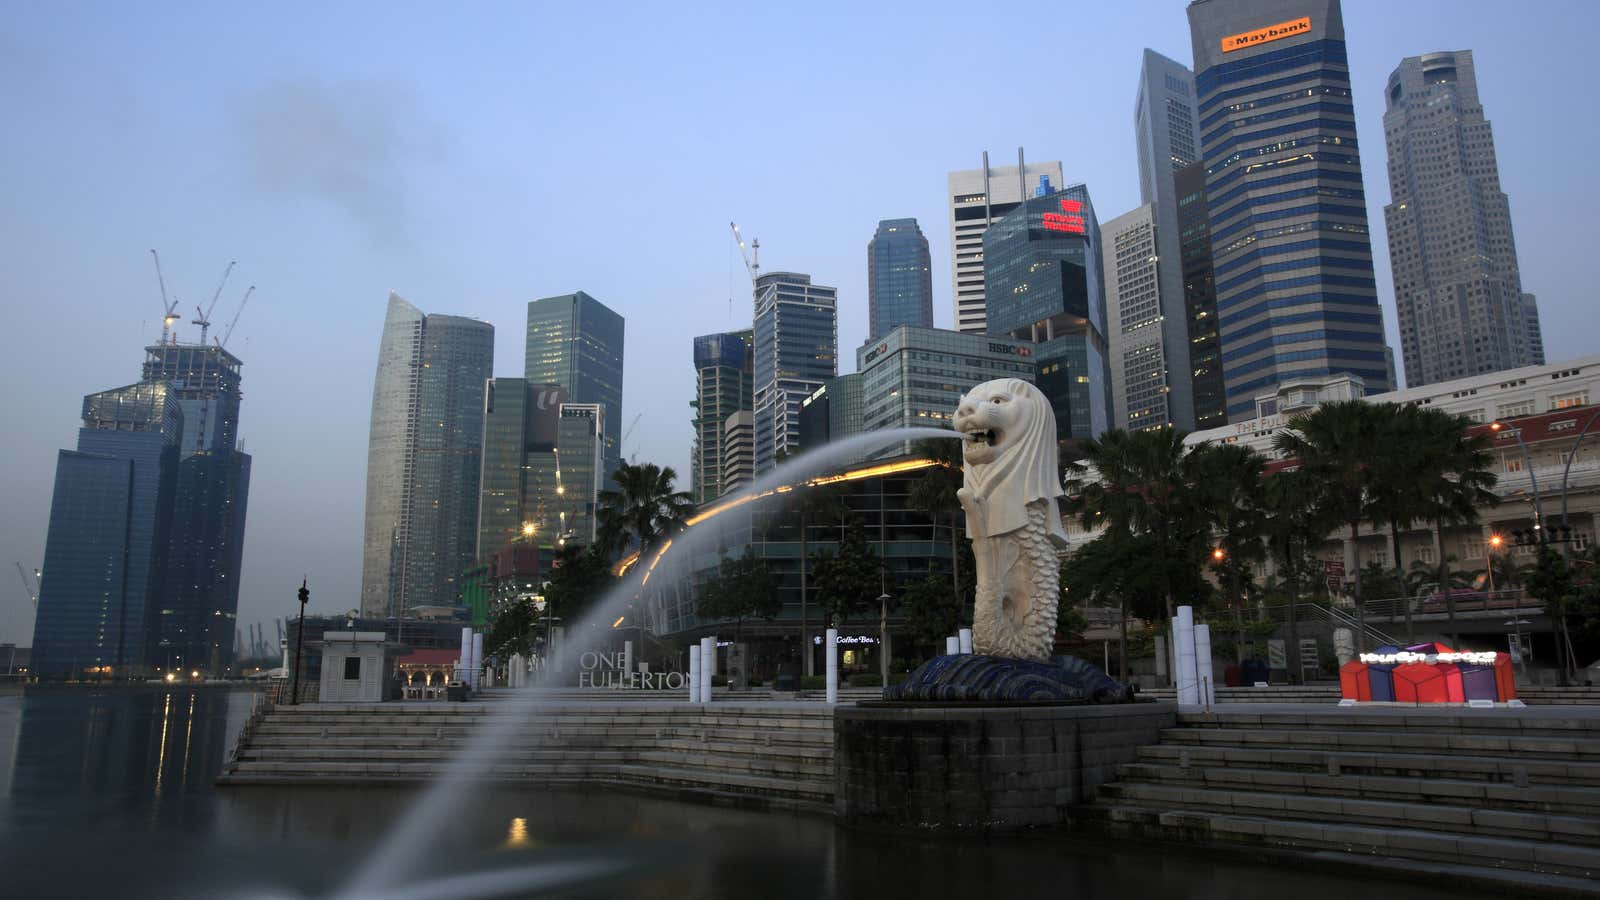 Singapore slings some heavy expenses.